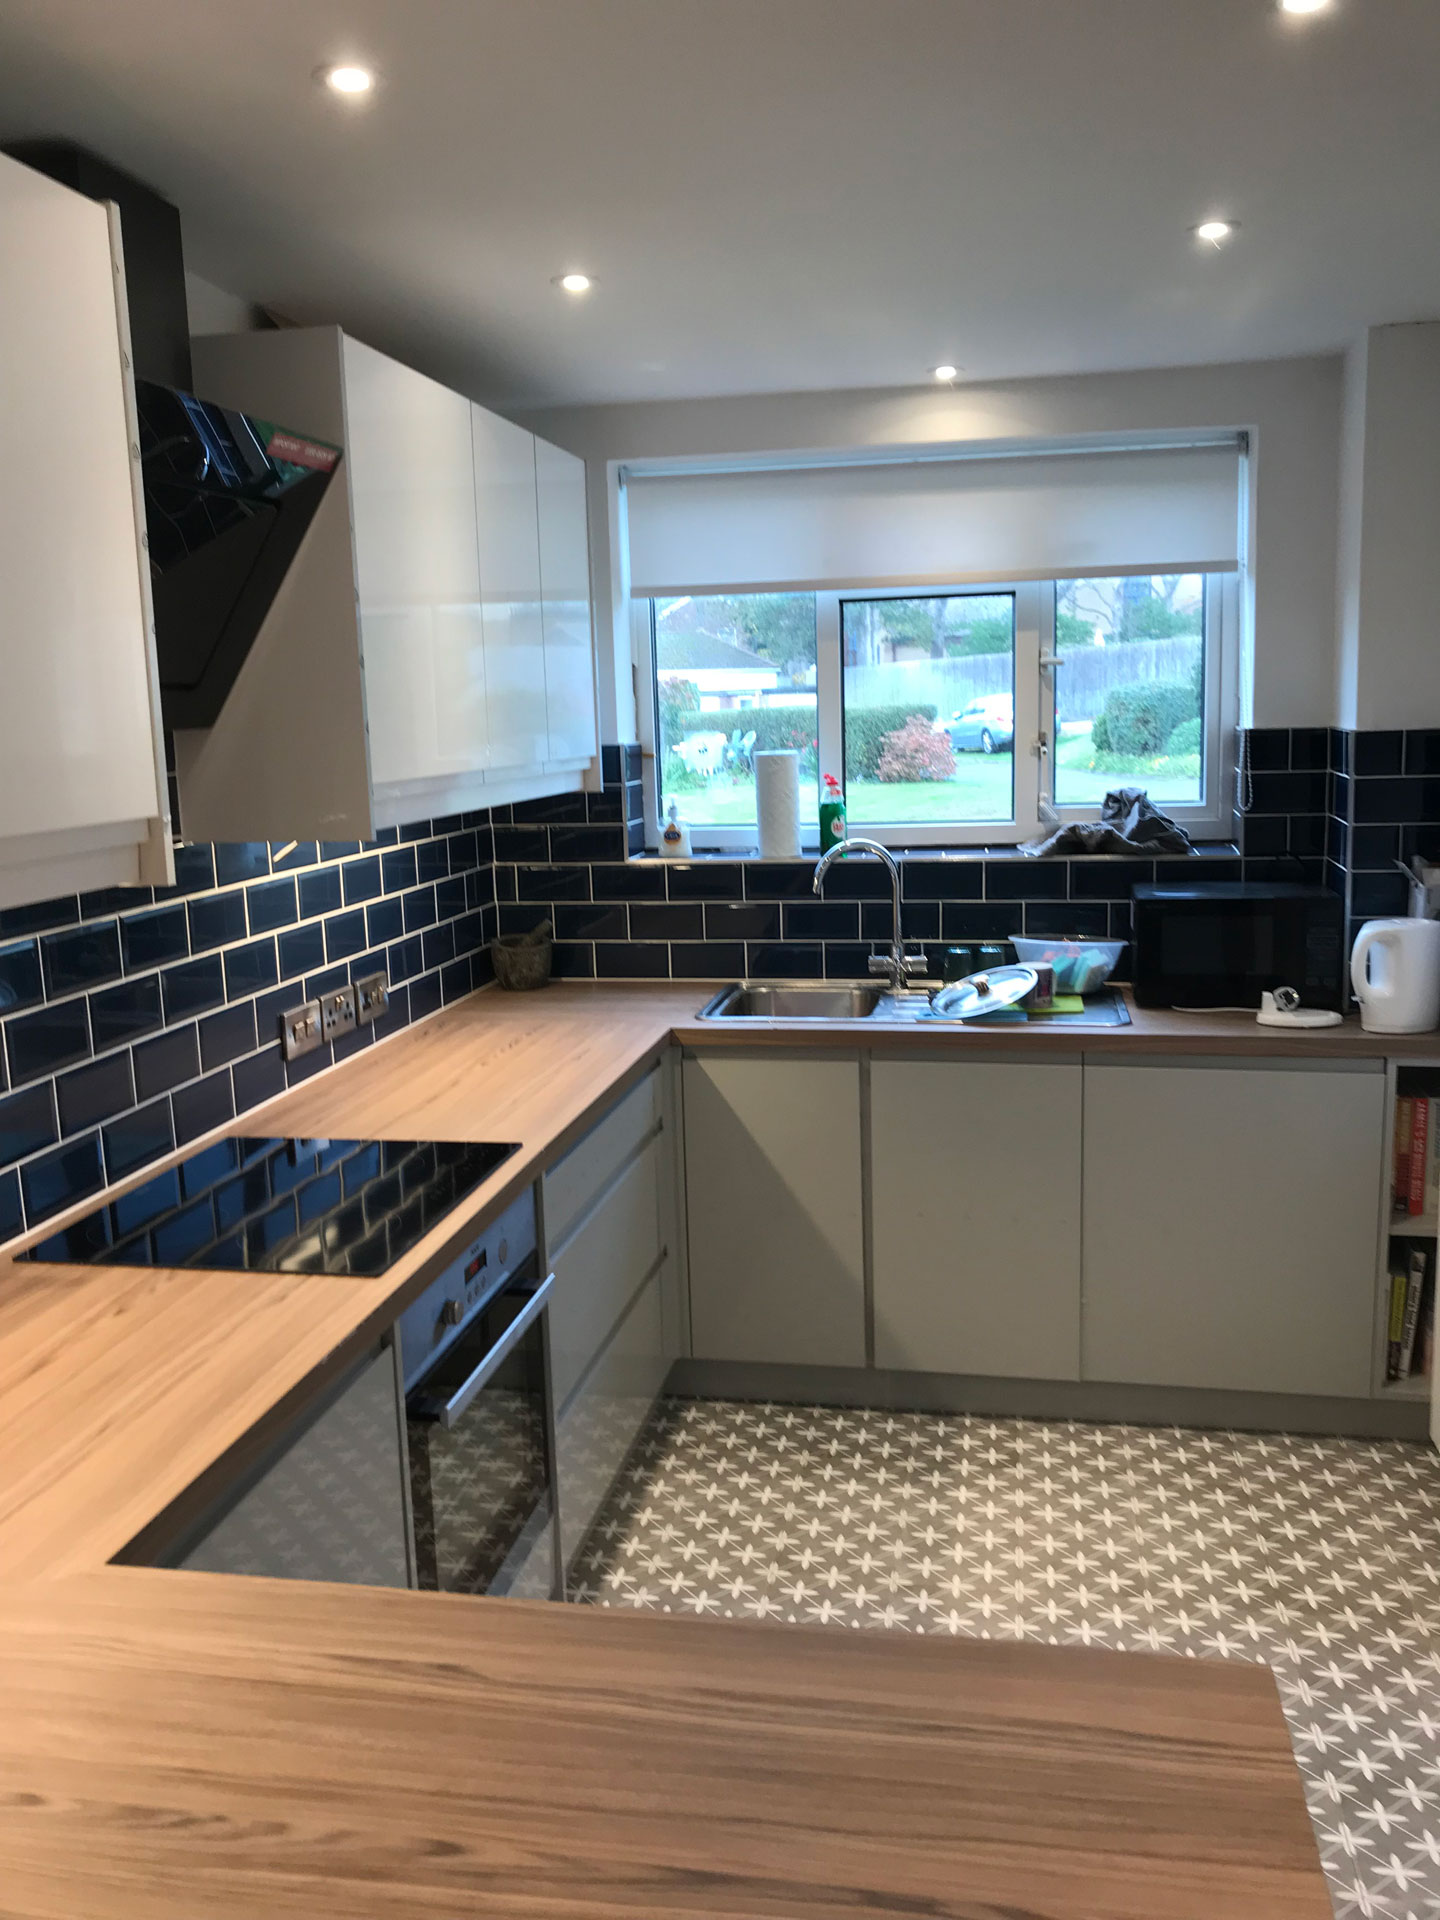 Kitchen Fitting for a Private Client in Southbourne, Bournemouth including all the Plastering, Electrics, Plumbing and Tiling - Emerald Painters Portfolio